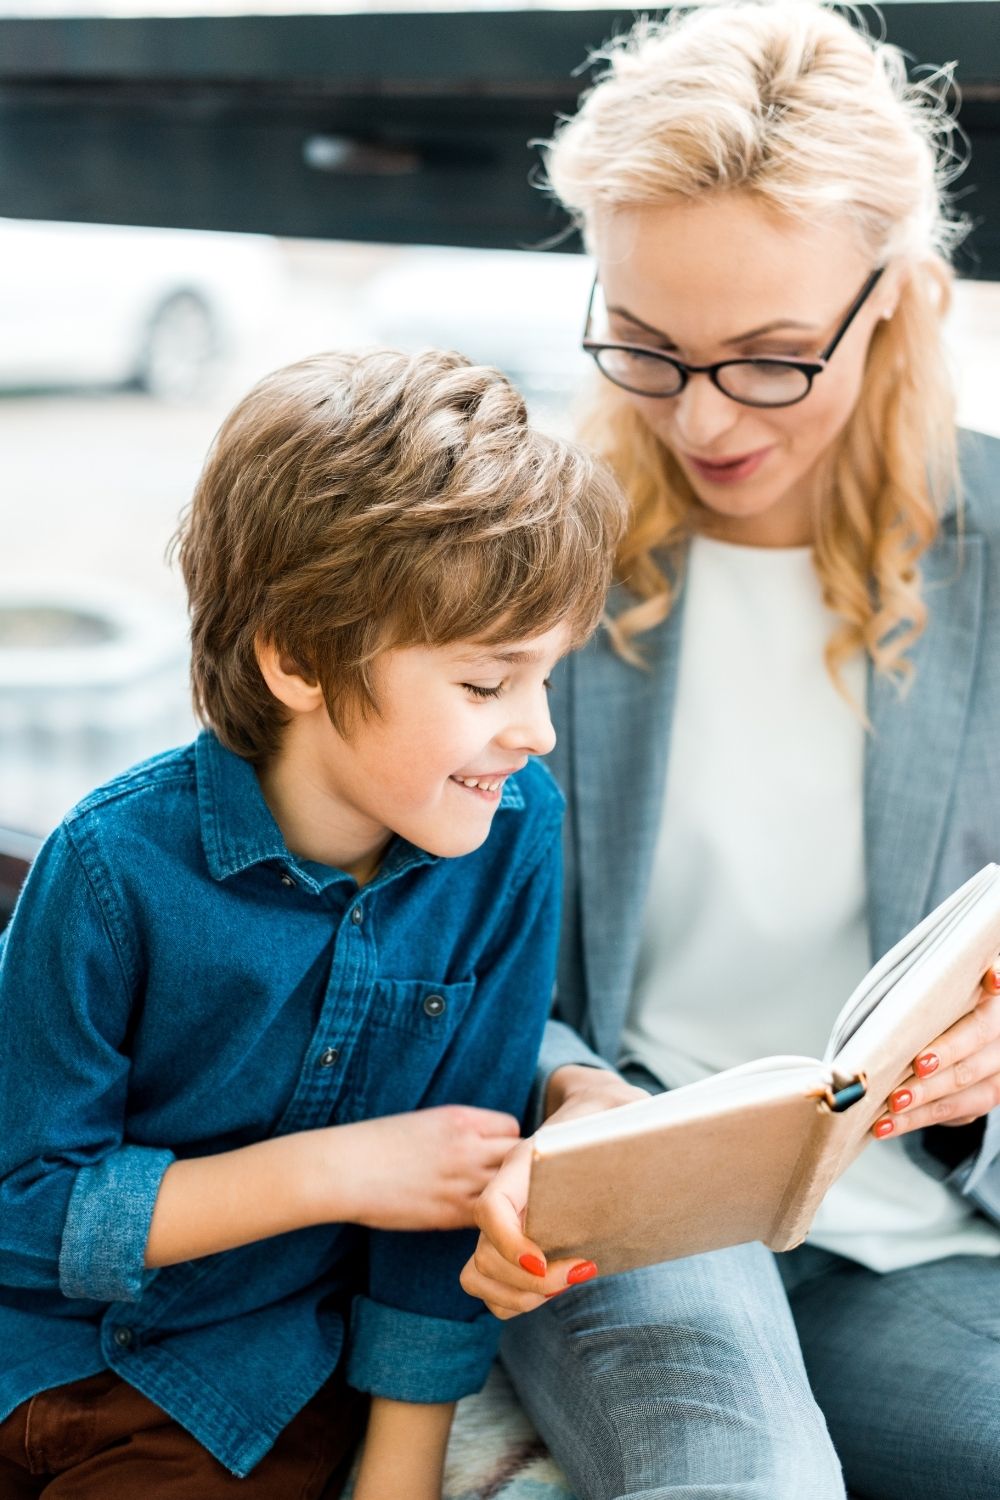 How To Build a Child’s Reading Comprehension